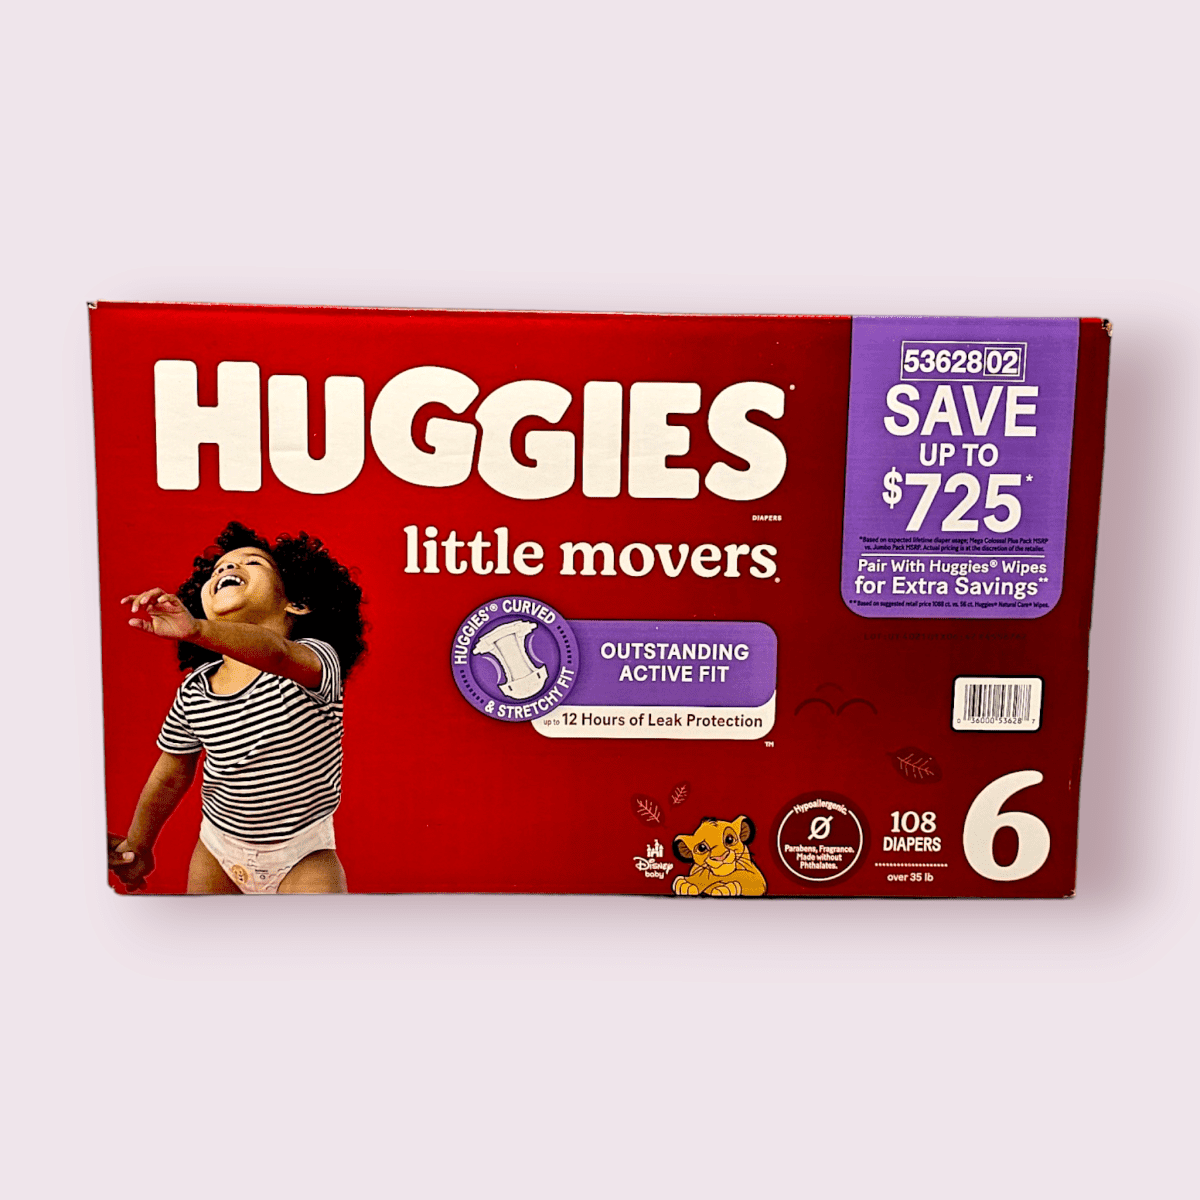 Huggies Little Movers 108 Diapers